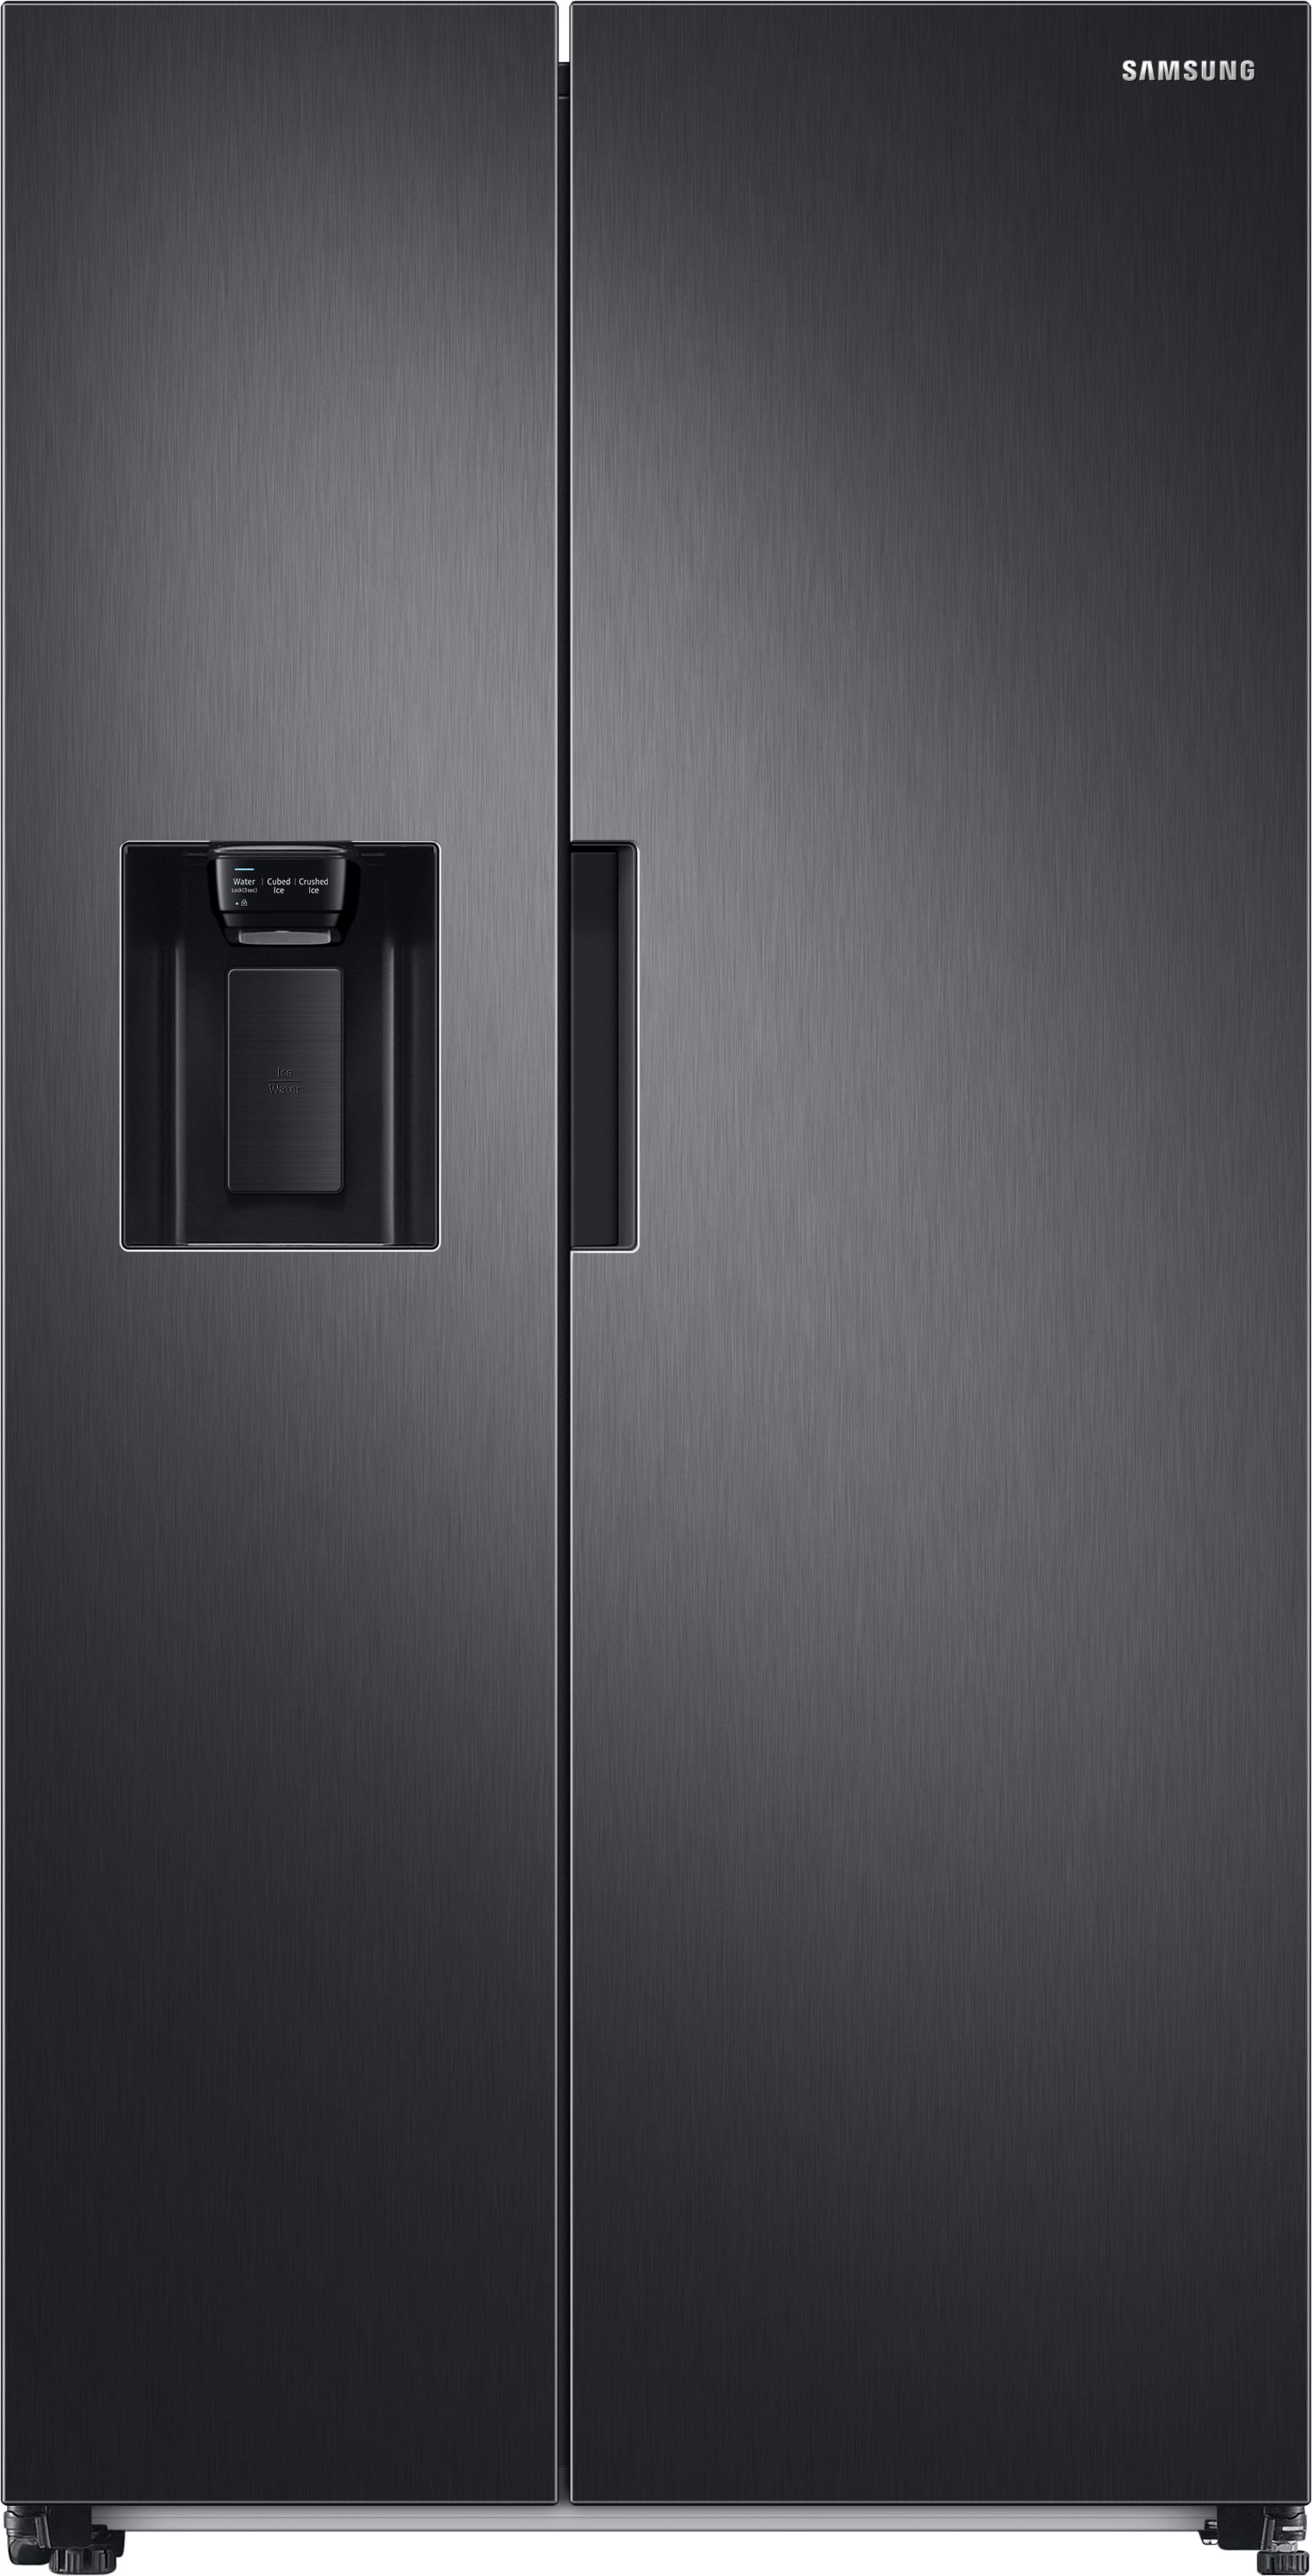 Samsung Series 7 SpaceMax RS67A8811B1EU Total No Frost American Fridge Freezer - Black - E Rated, Black